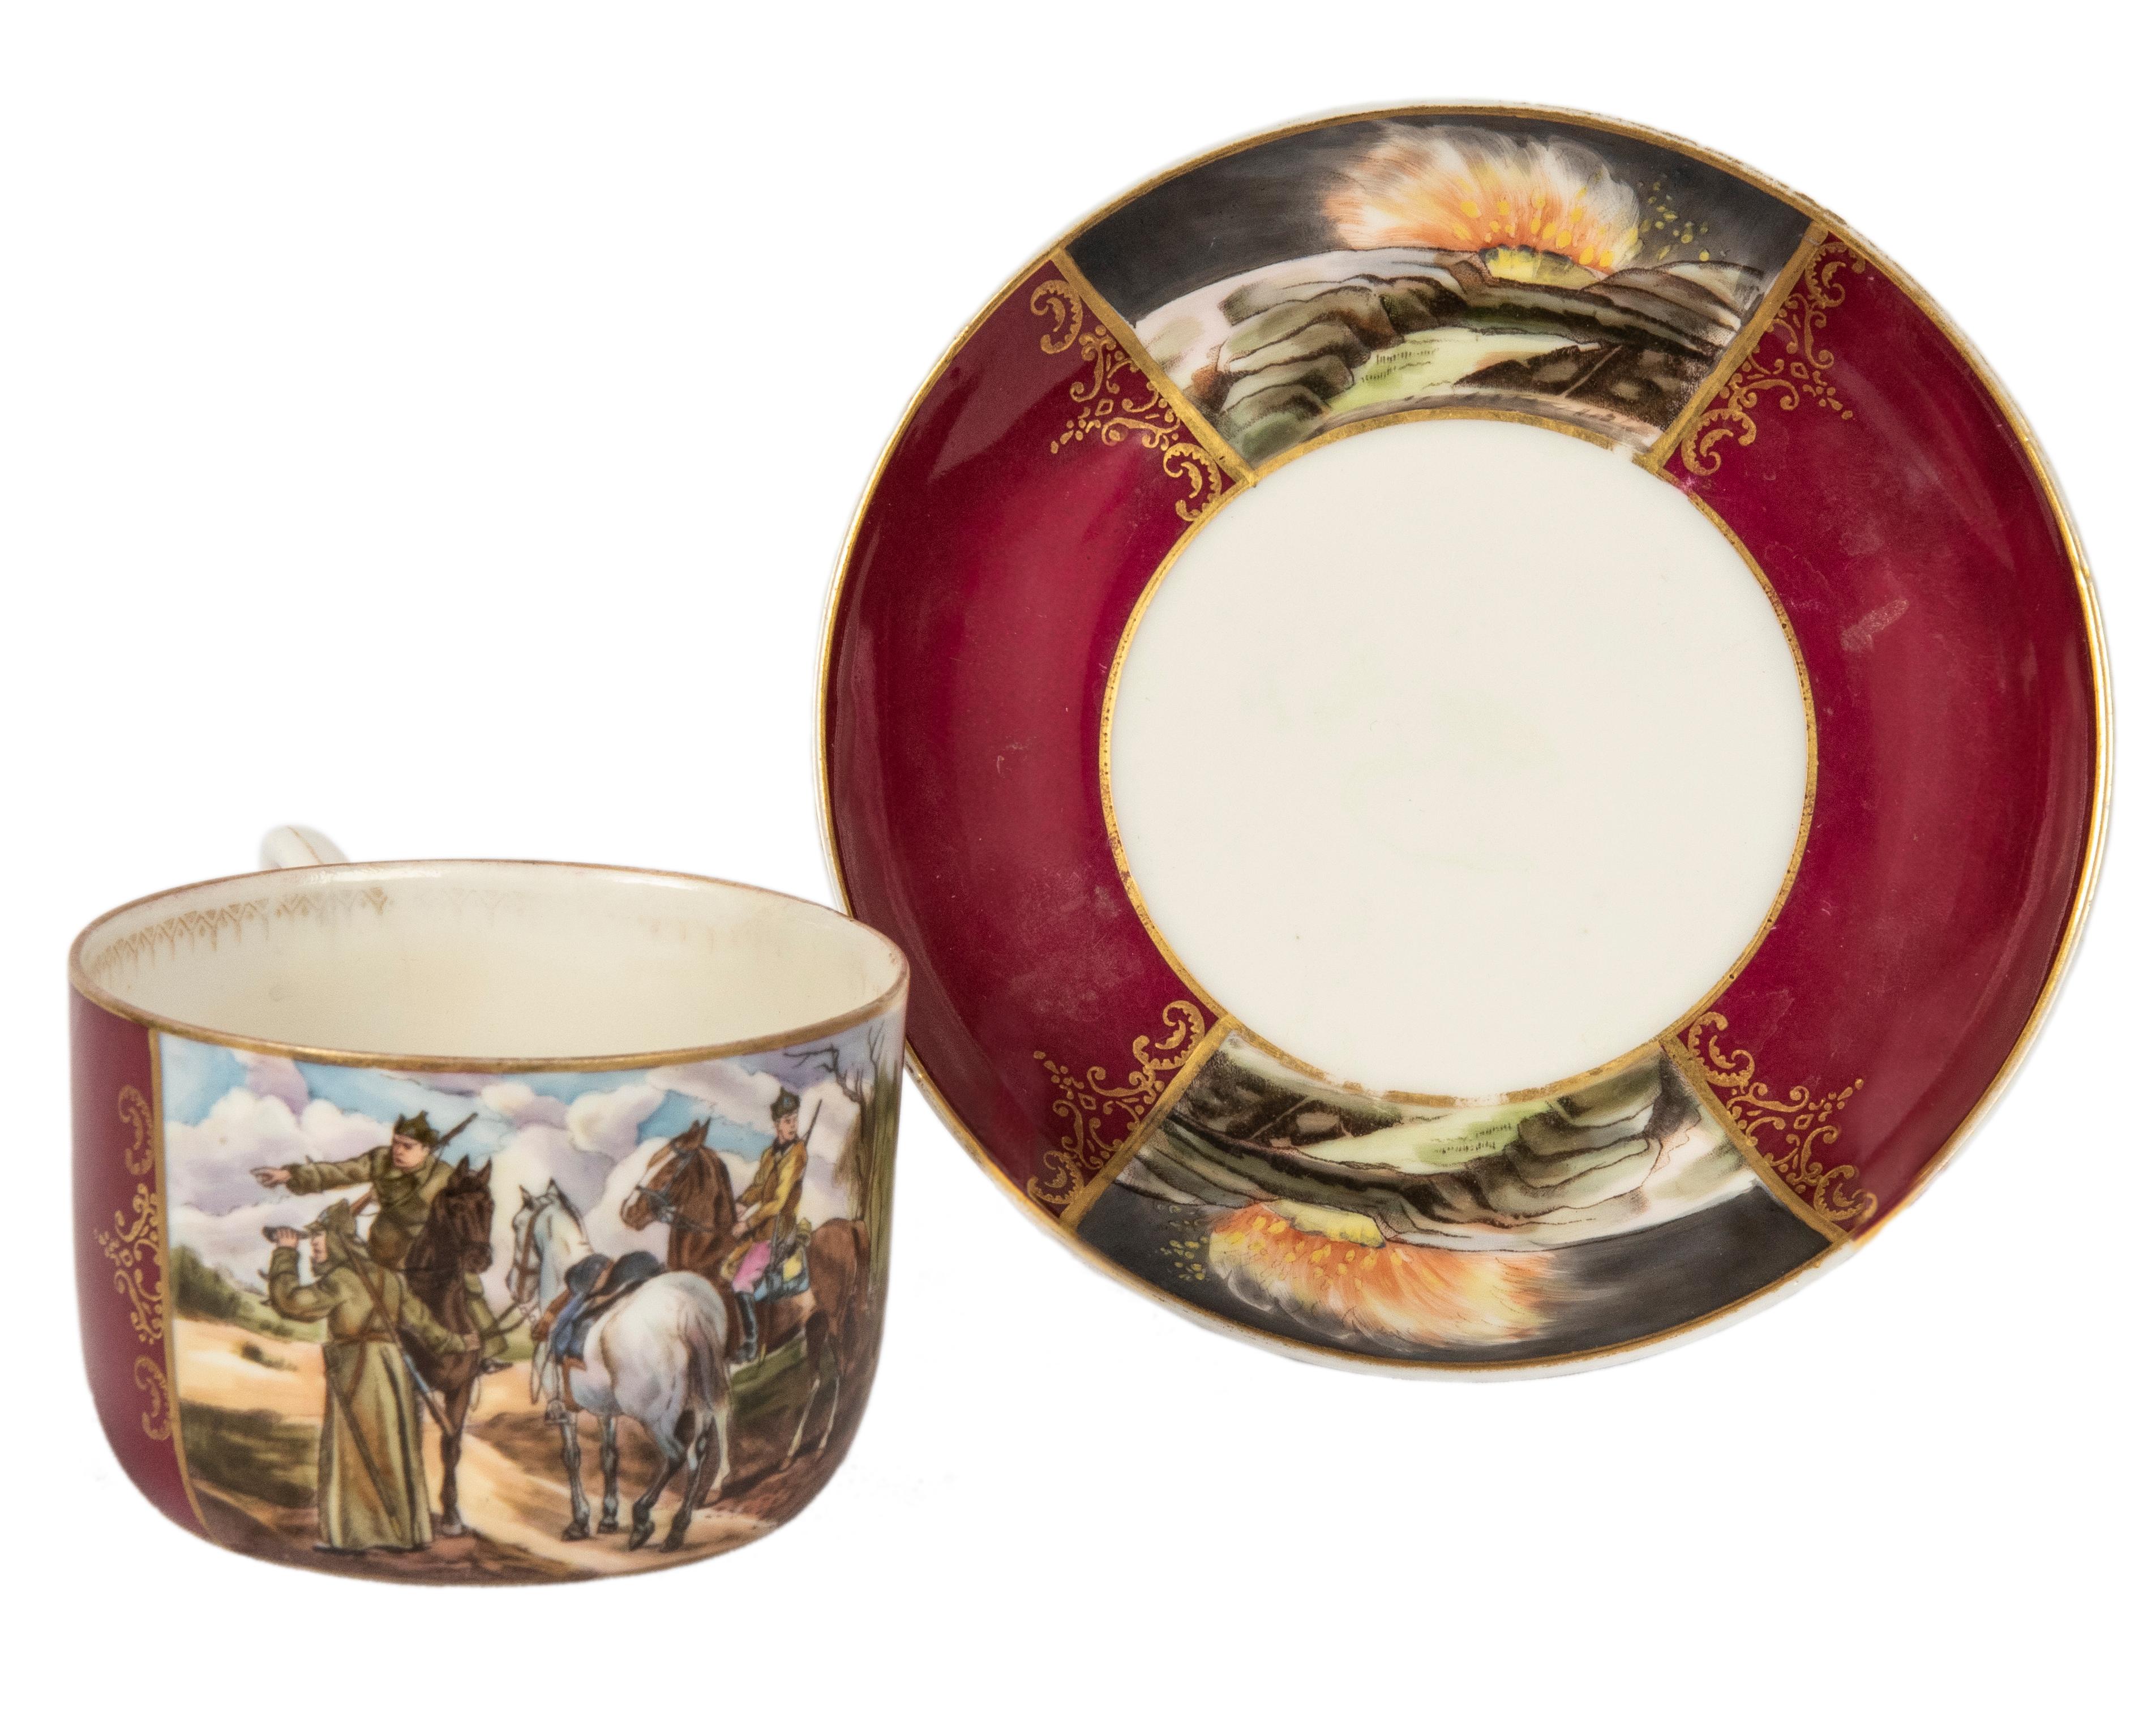  Russian Civil War Commemorative Porcelain Cup and Saucer In Good Condition For Sale In St. Catharines, ON